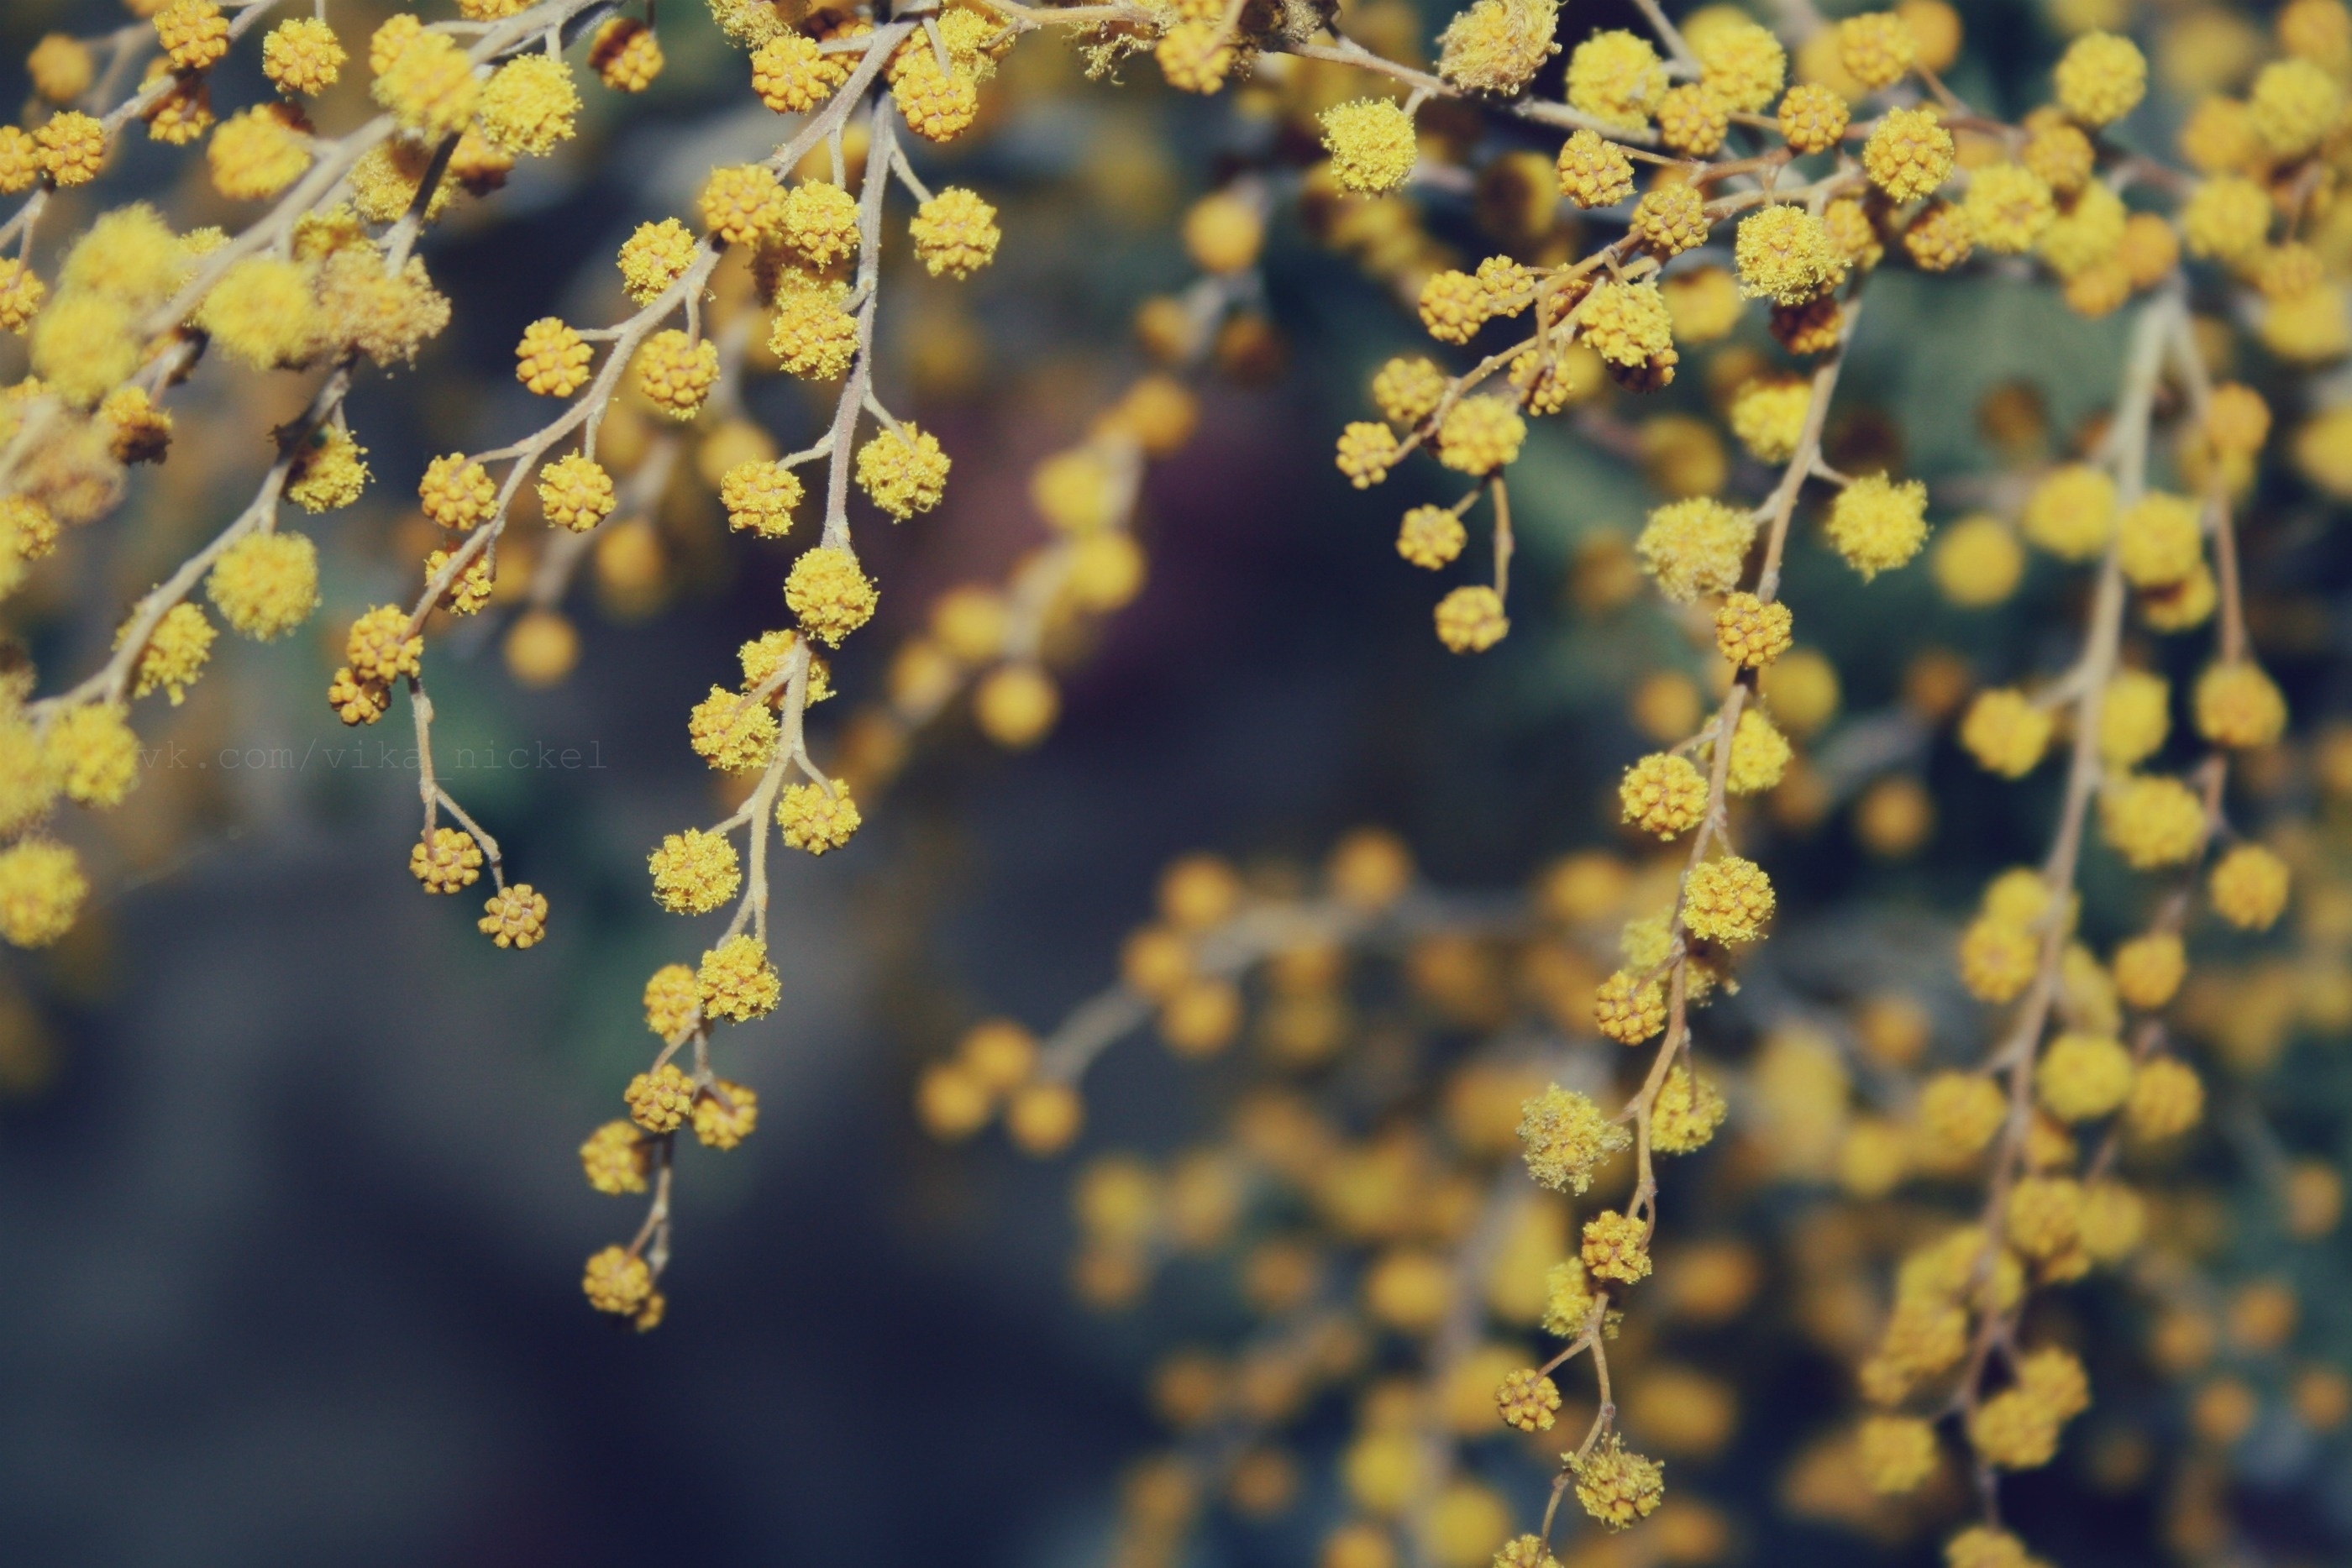 flowers, macro, handsomely, it's beautiful, mimosa